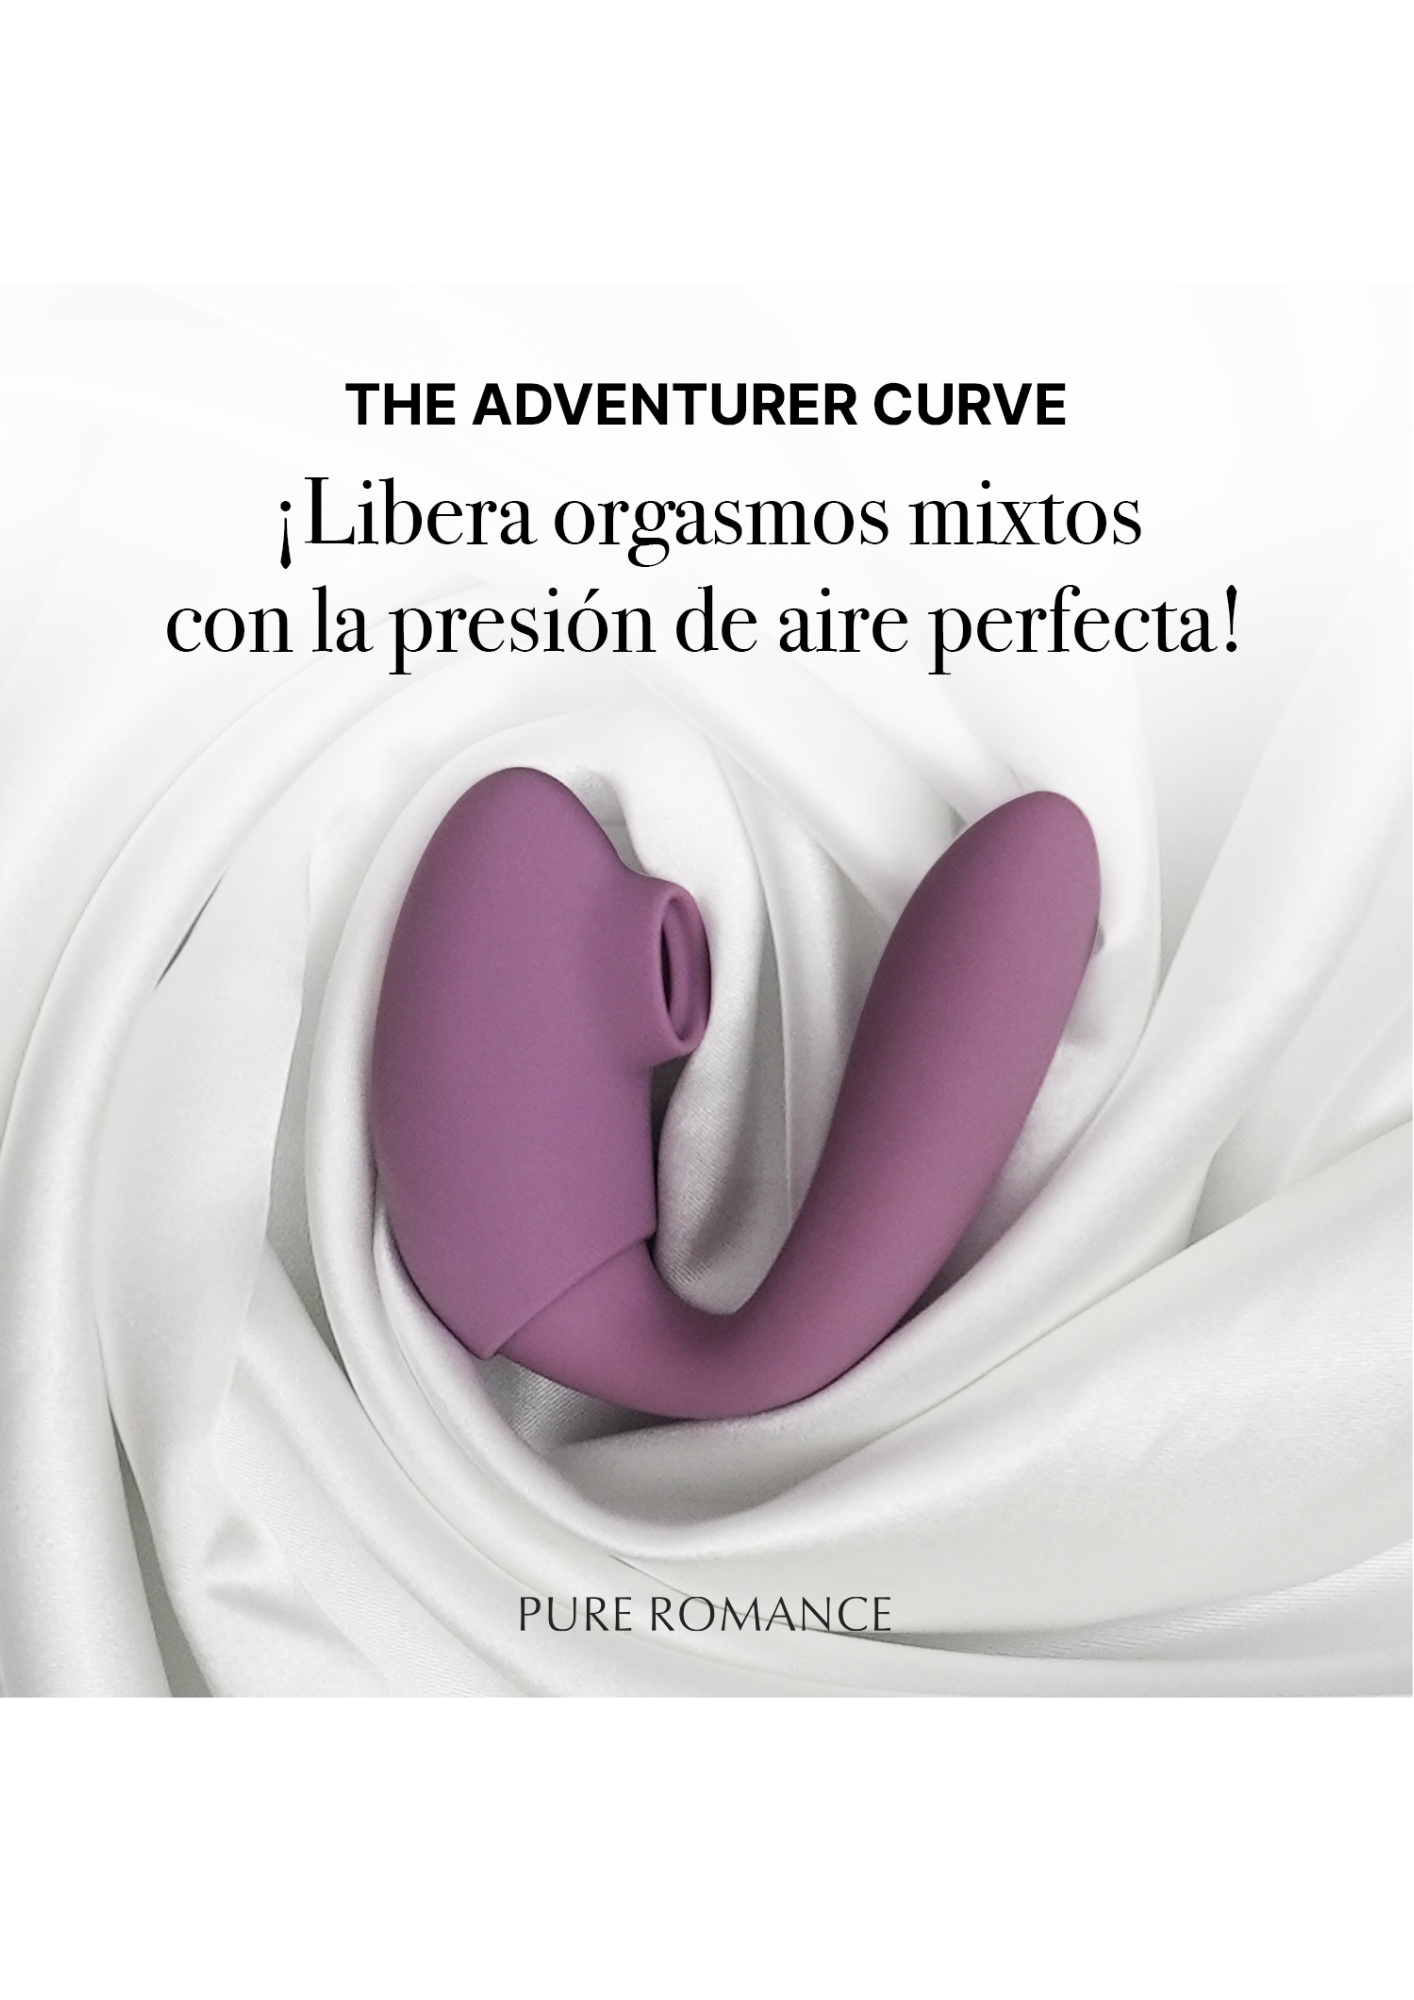 The Adventurer Curve (37) - FREE SHIPPING